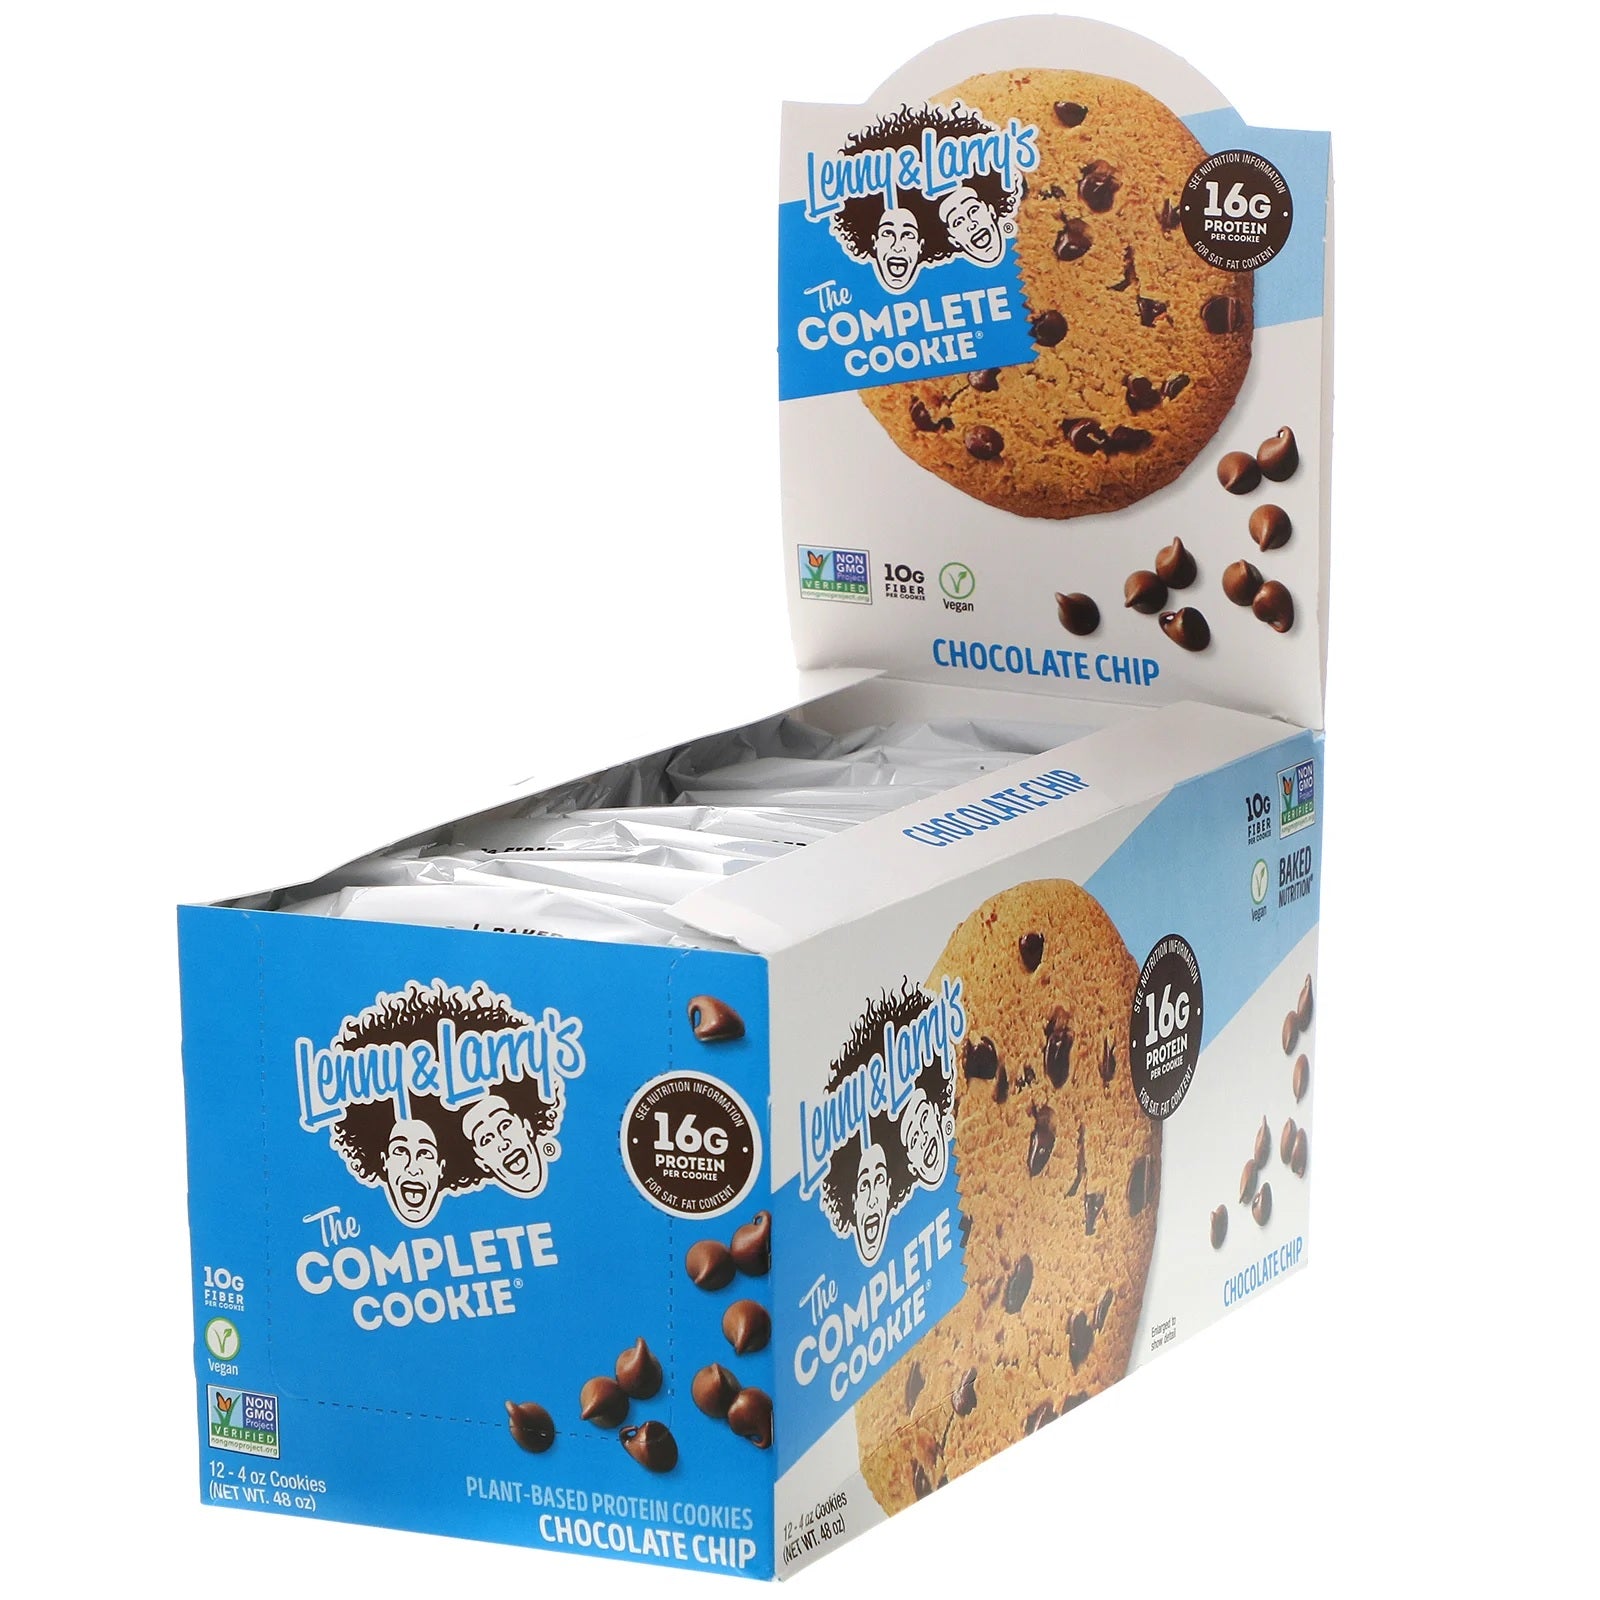 THE COMPLETE COOKIE 12 COOKIES LENNY & LARRYS